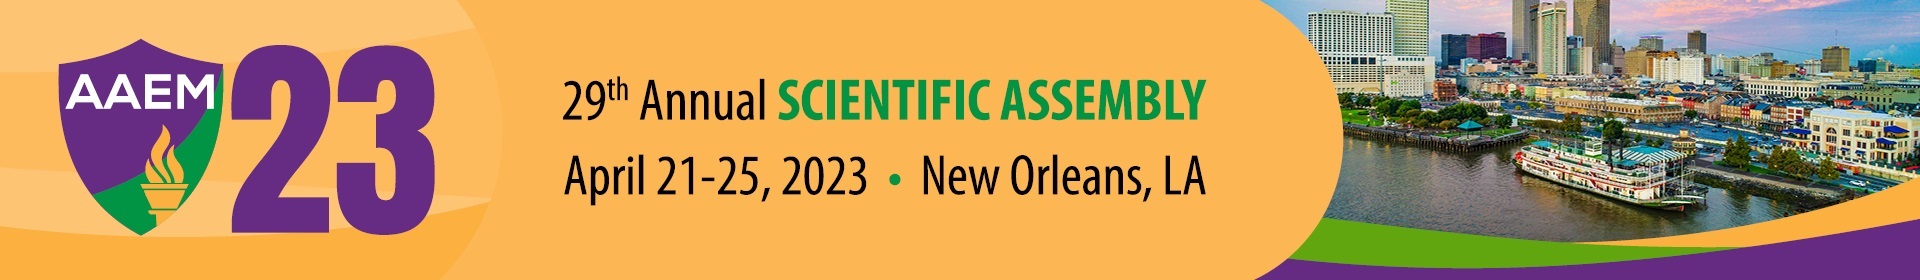 2023 AAEM Scientific Assembly Competitions Event Banner